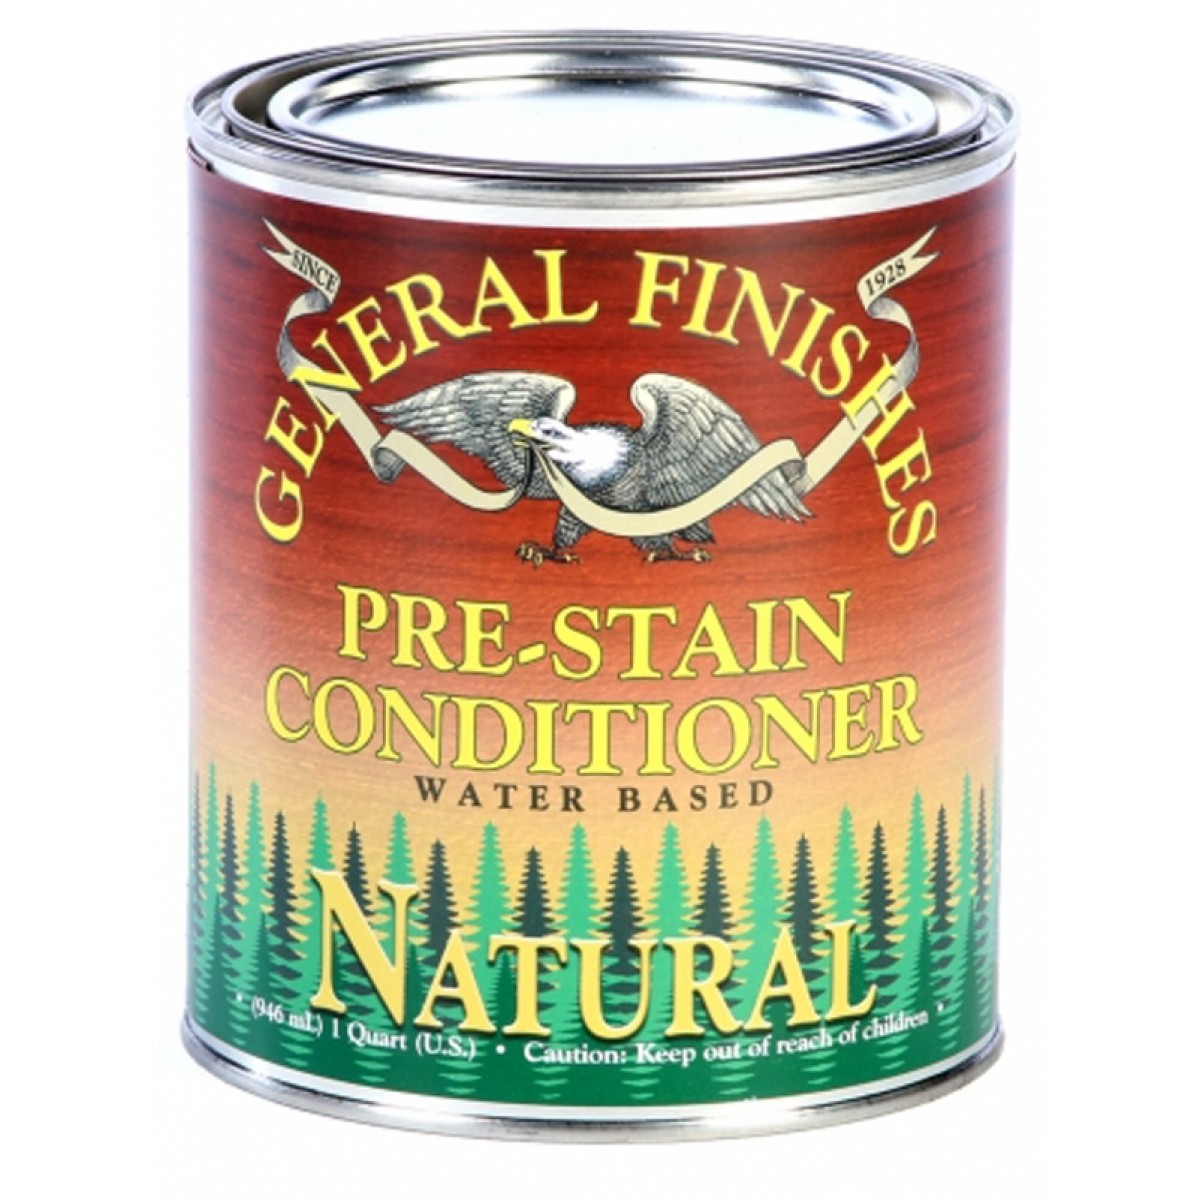 stain conditioner pre wood nat 473ml based water natural